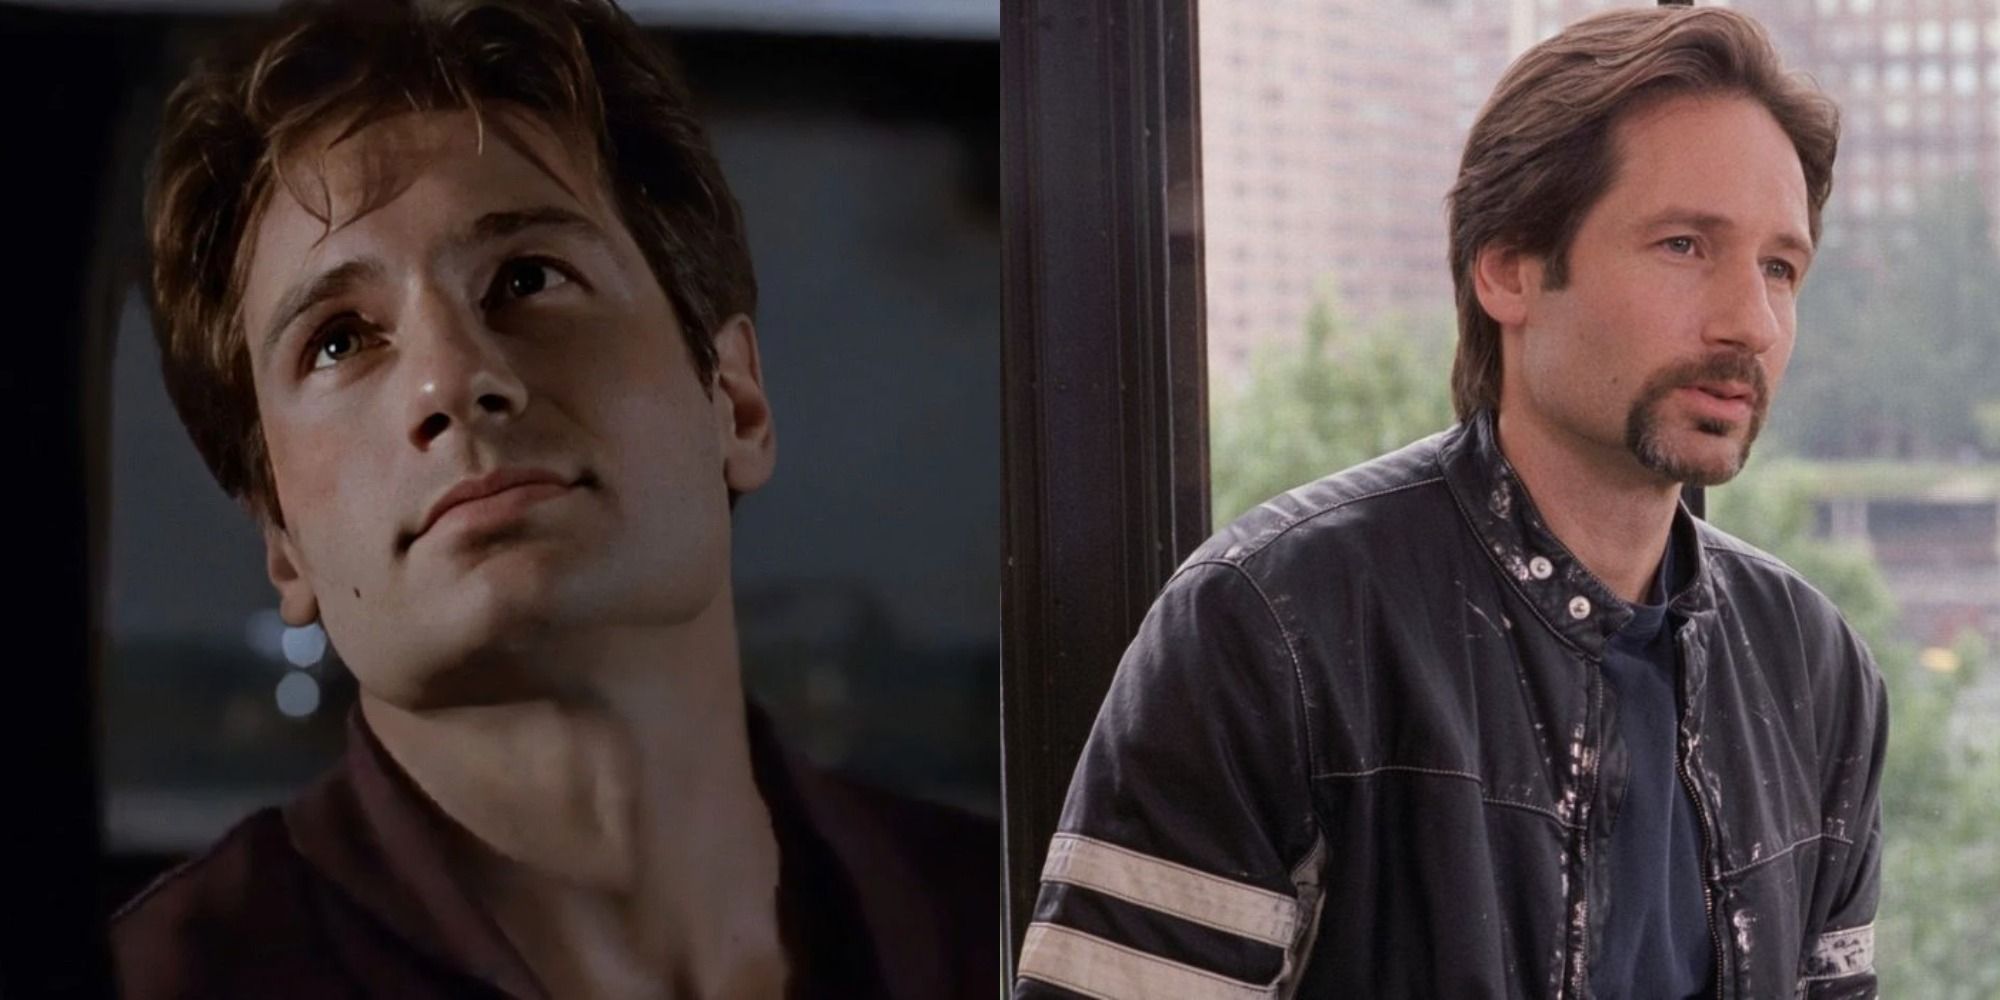 10 Best David Duchovny Movies & Shows, Ranked According To IMBd